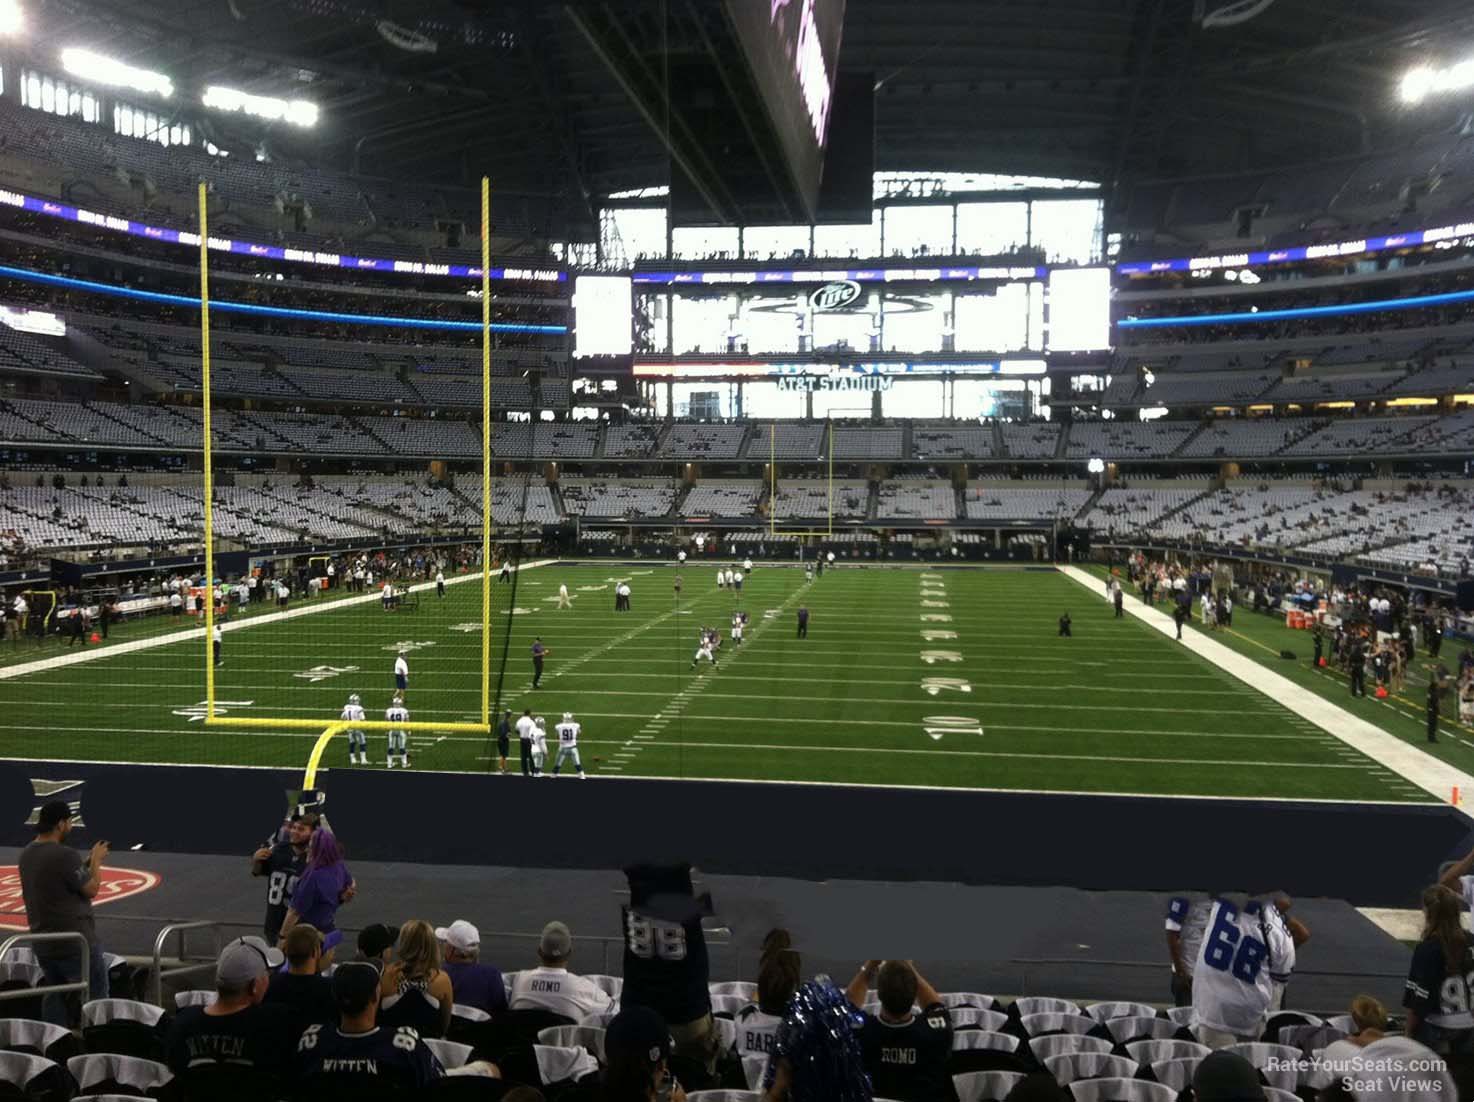 AT&T Stadium Section 147 - Dallas Cowboys - RateYourSeats.com